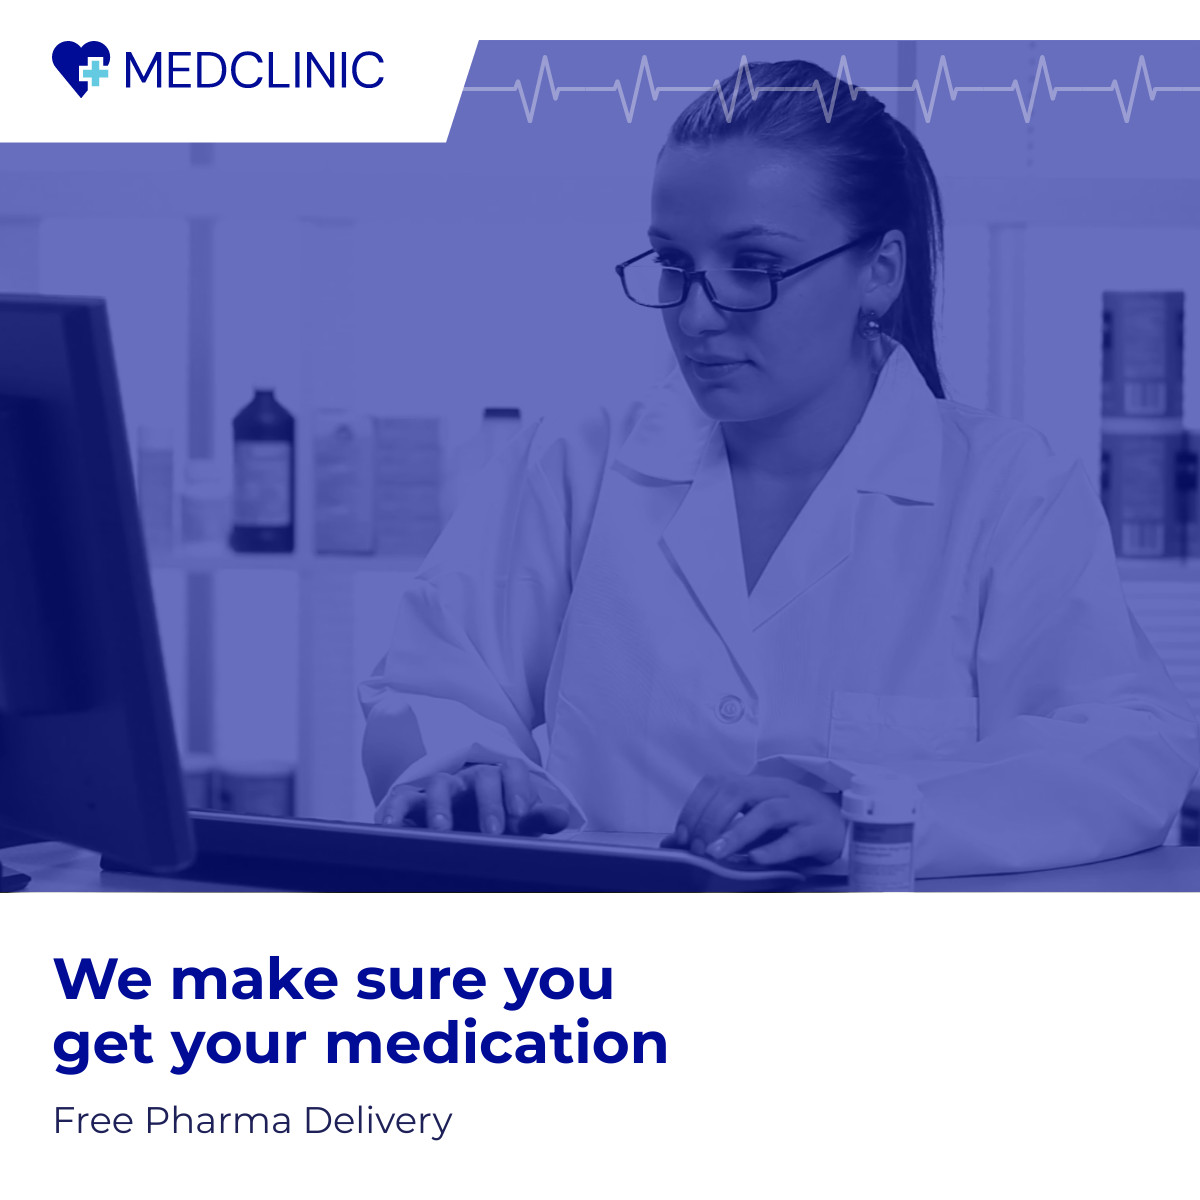 Mediclinic Pharma Medication Delivery Video Facebook Video Cover 1250x463